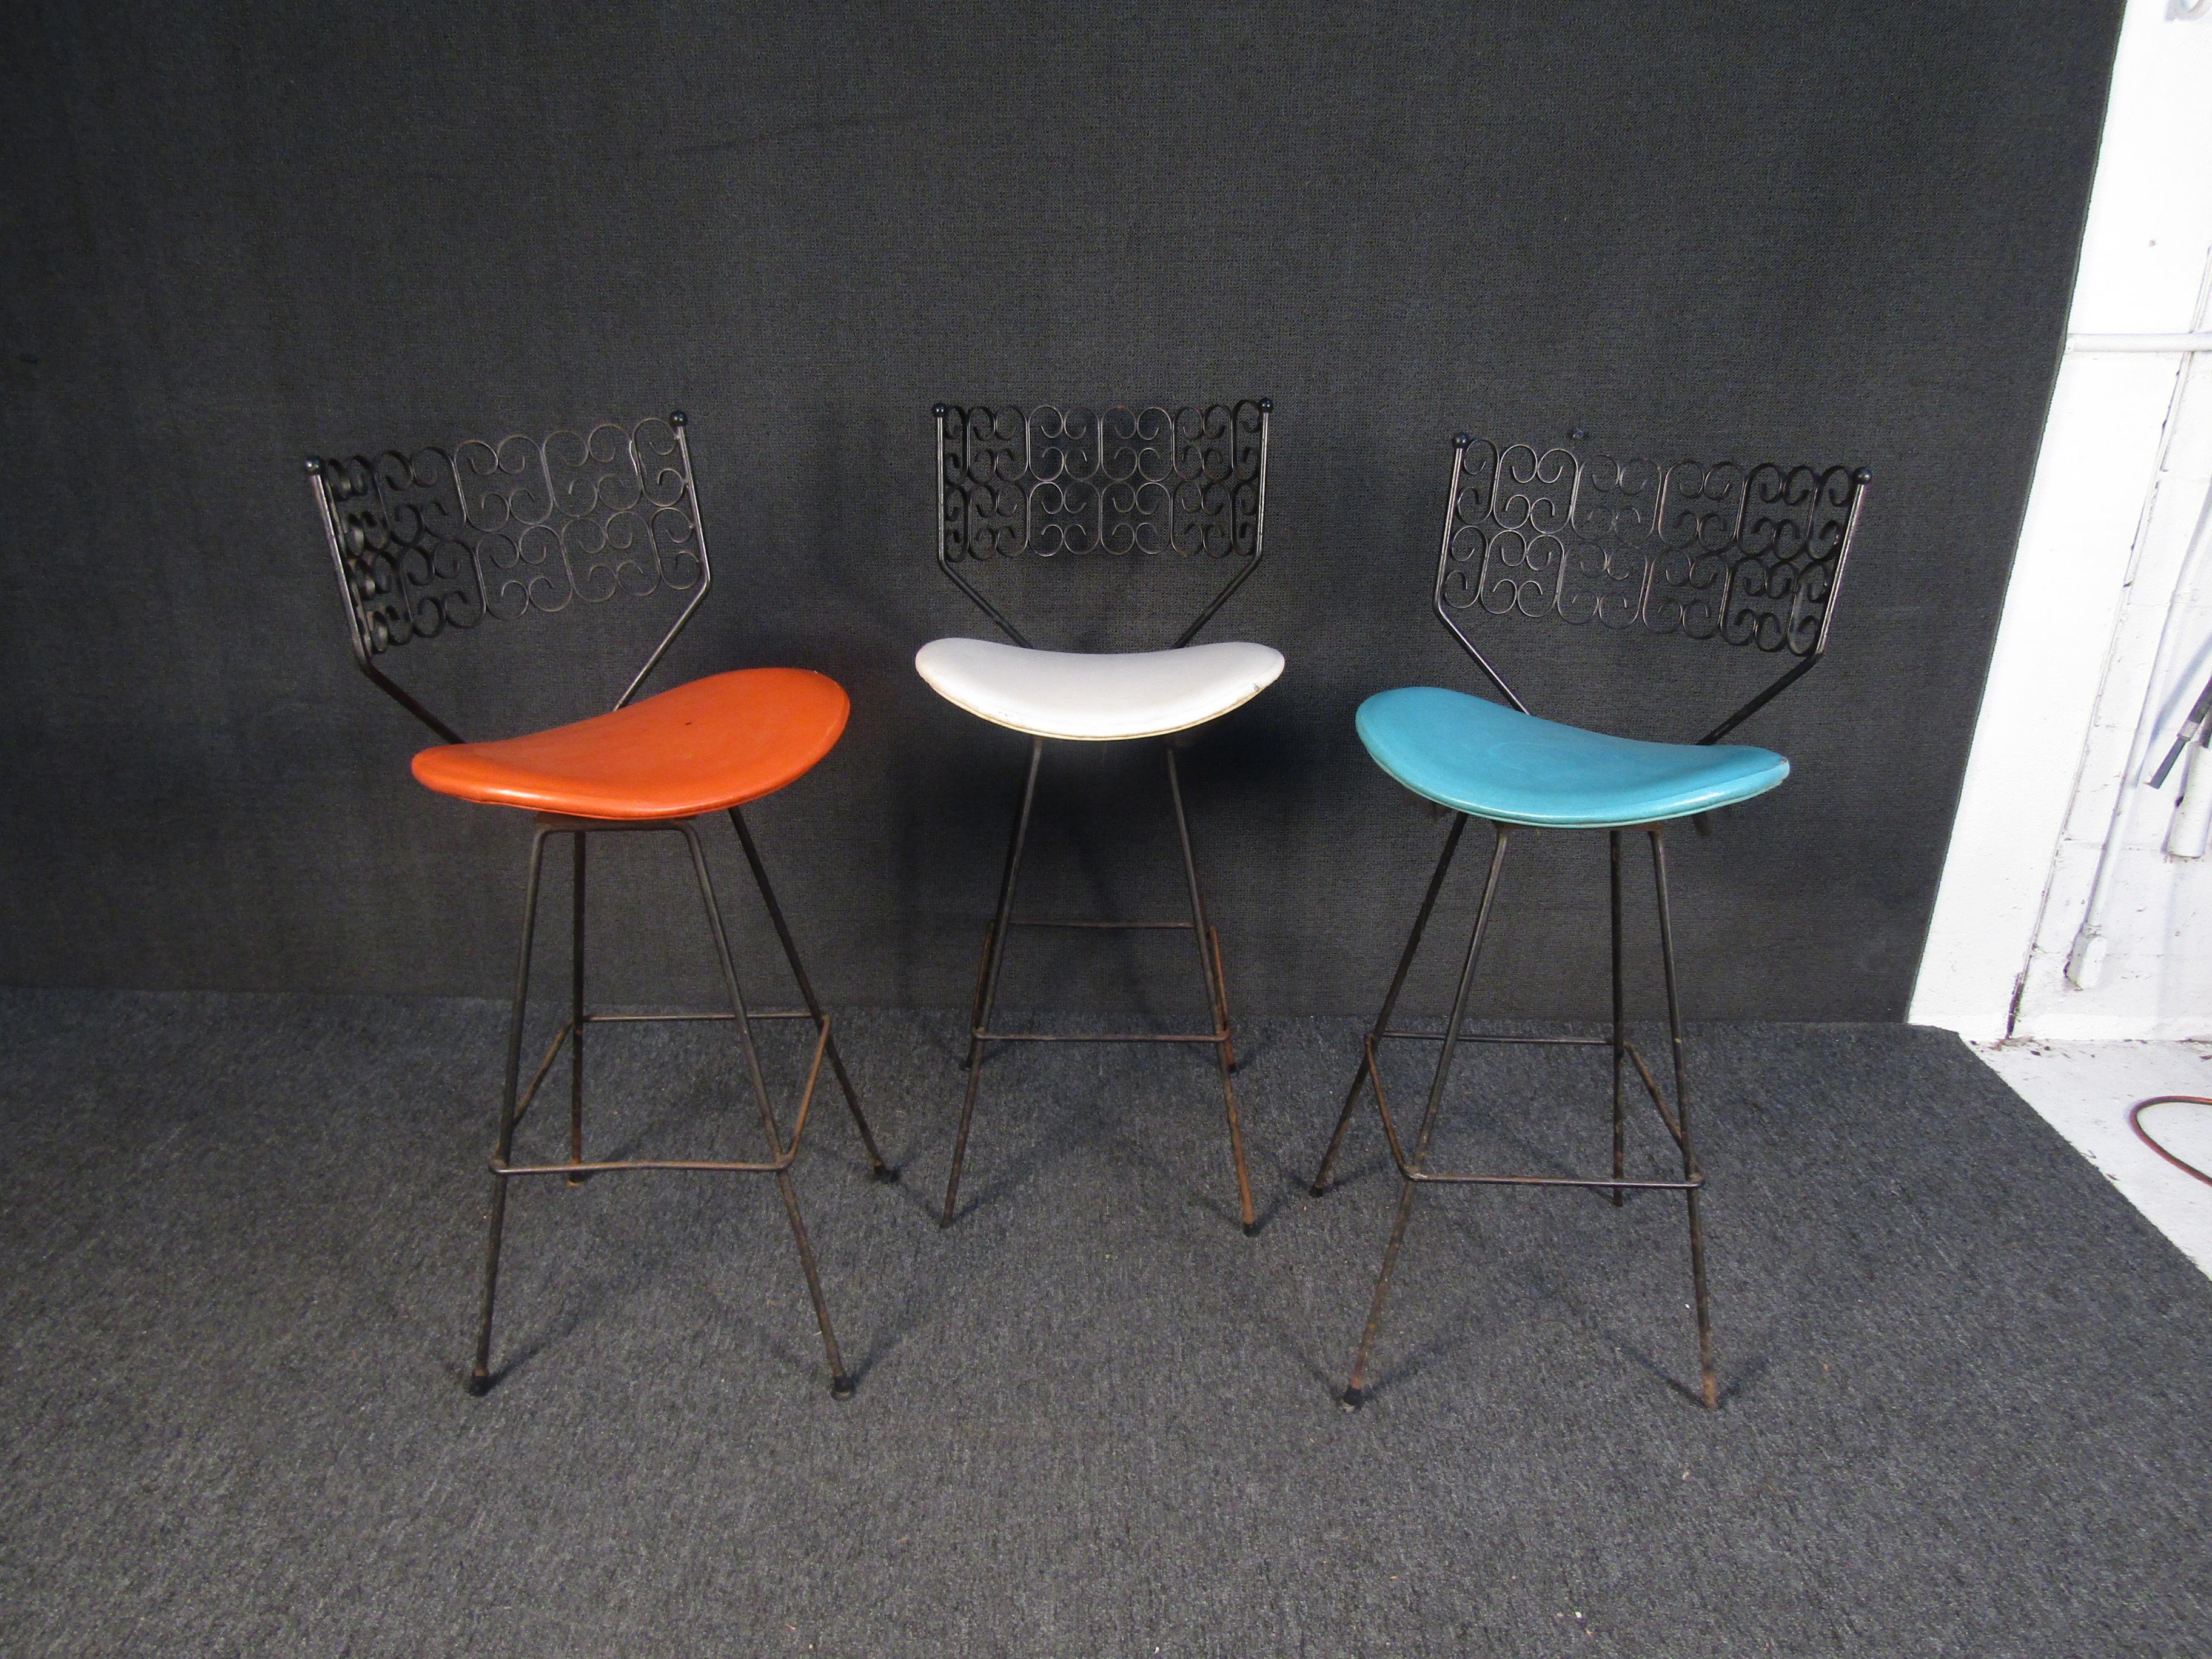 With contrasting colors of vinyl seat coverings, these vintage stools feature metal backs with playful decorative patterns. Made by Arthur Umanoff for Shaver Howard.
Please confirm item location with seller (NY/NJ).